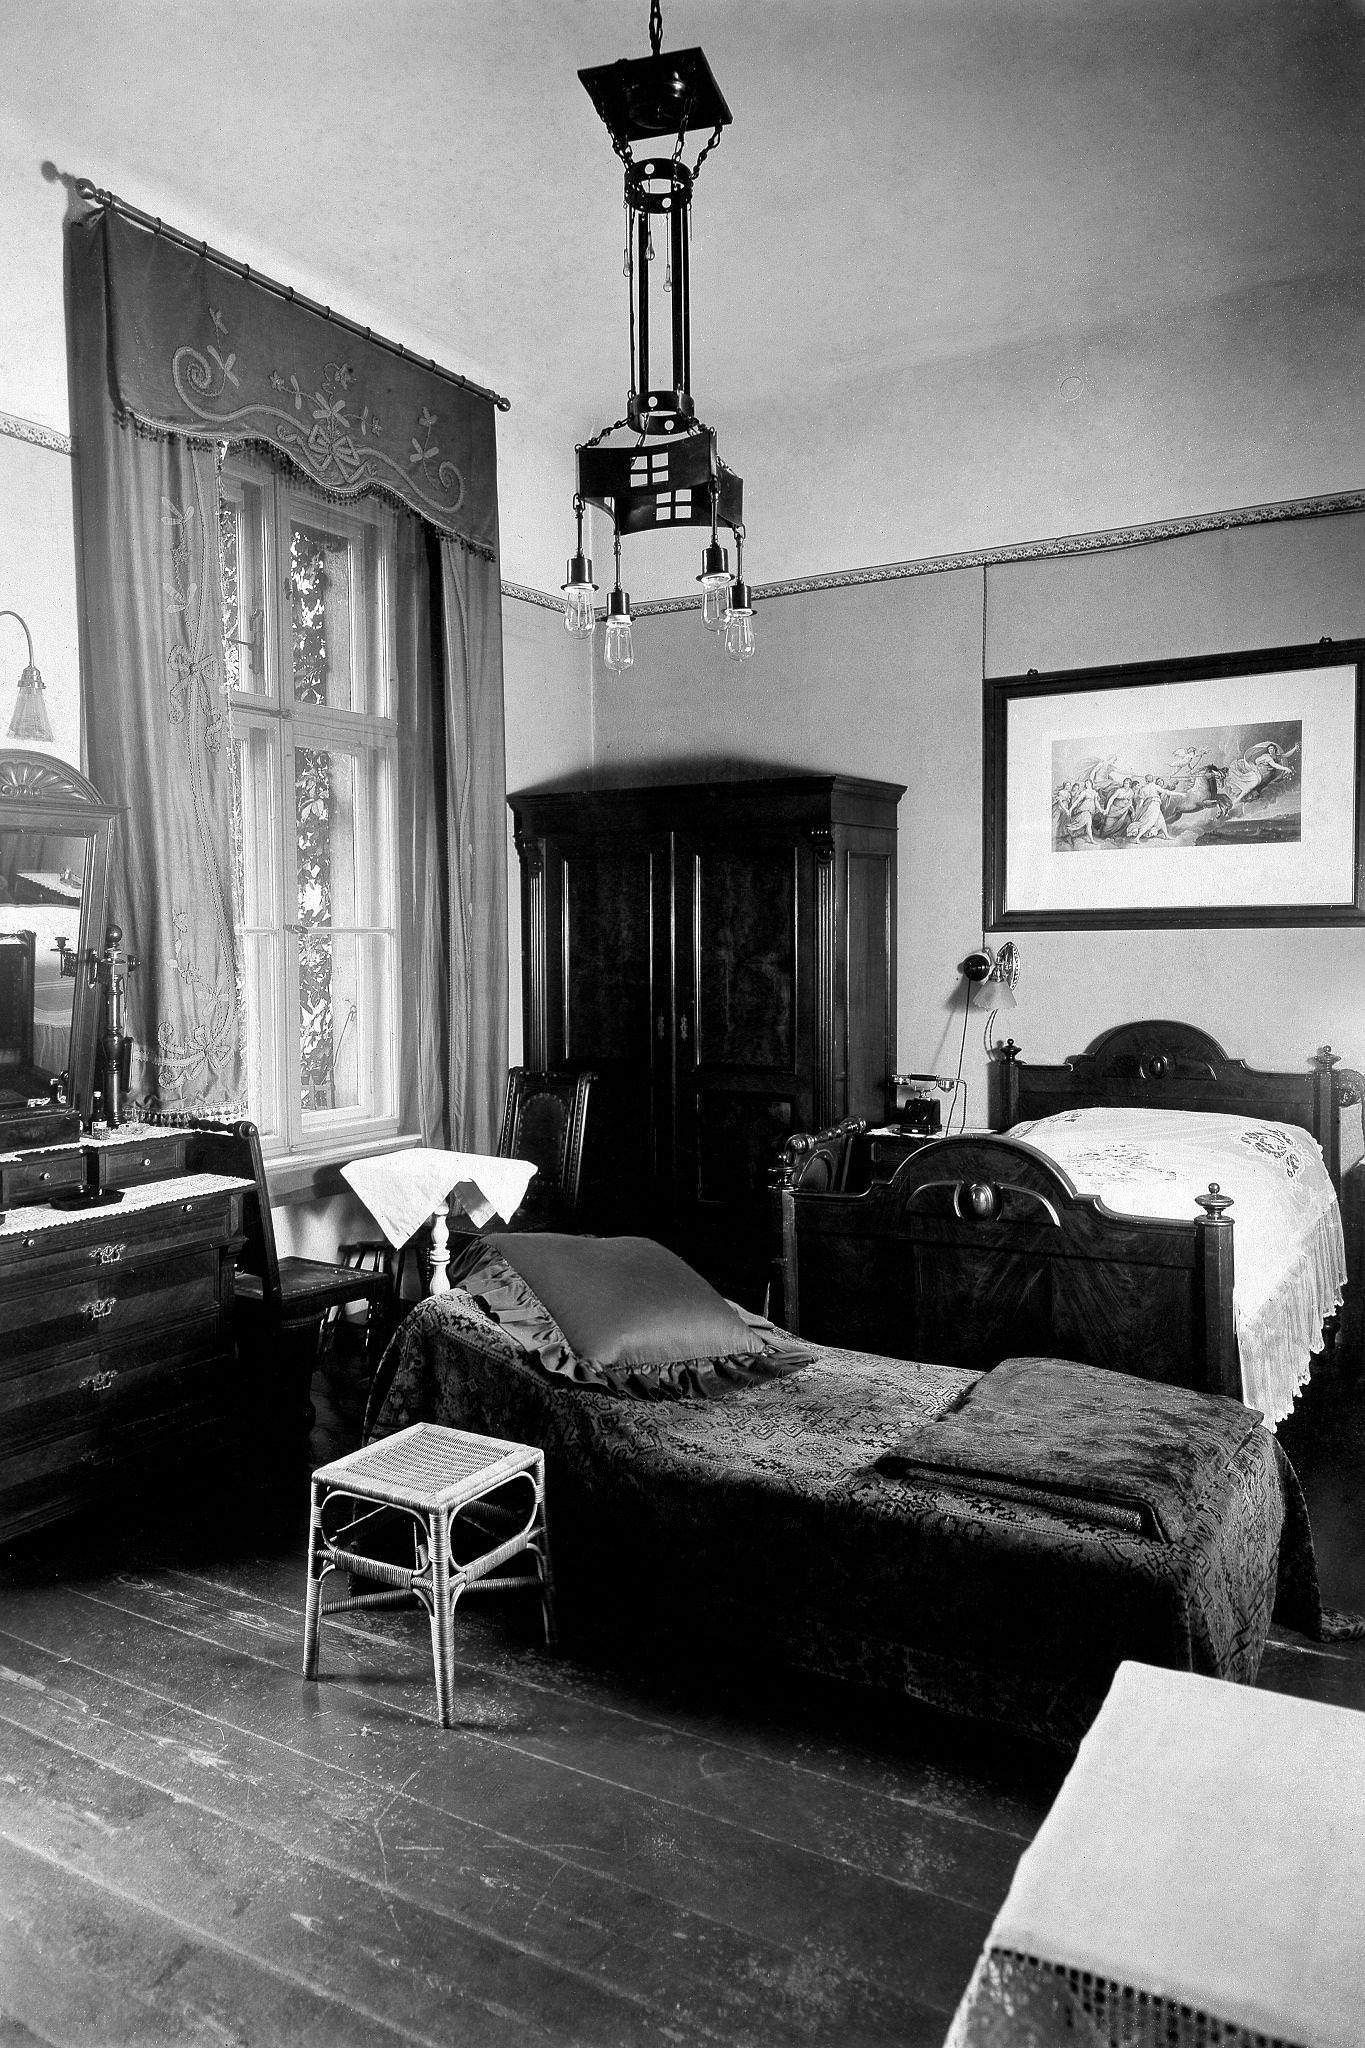 Old fashioned bedroom with 19th century furniture, beds.